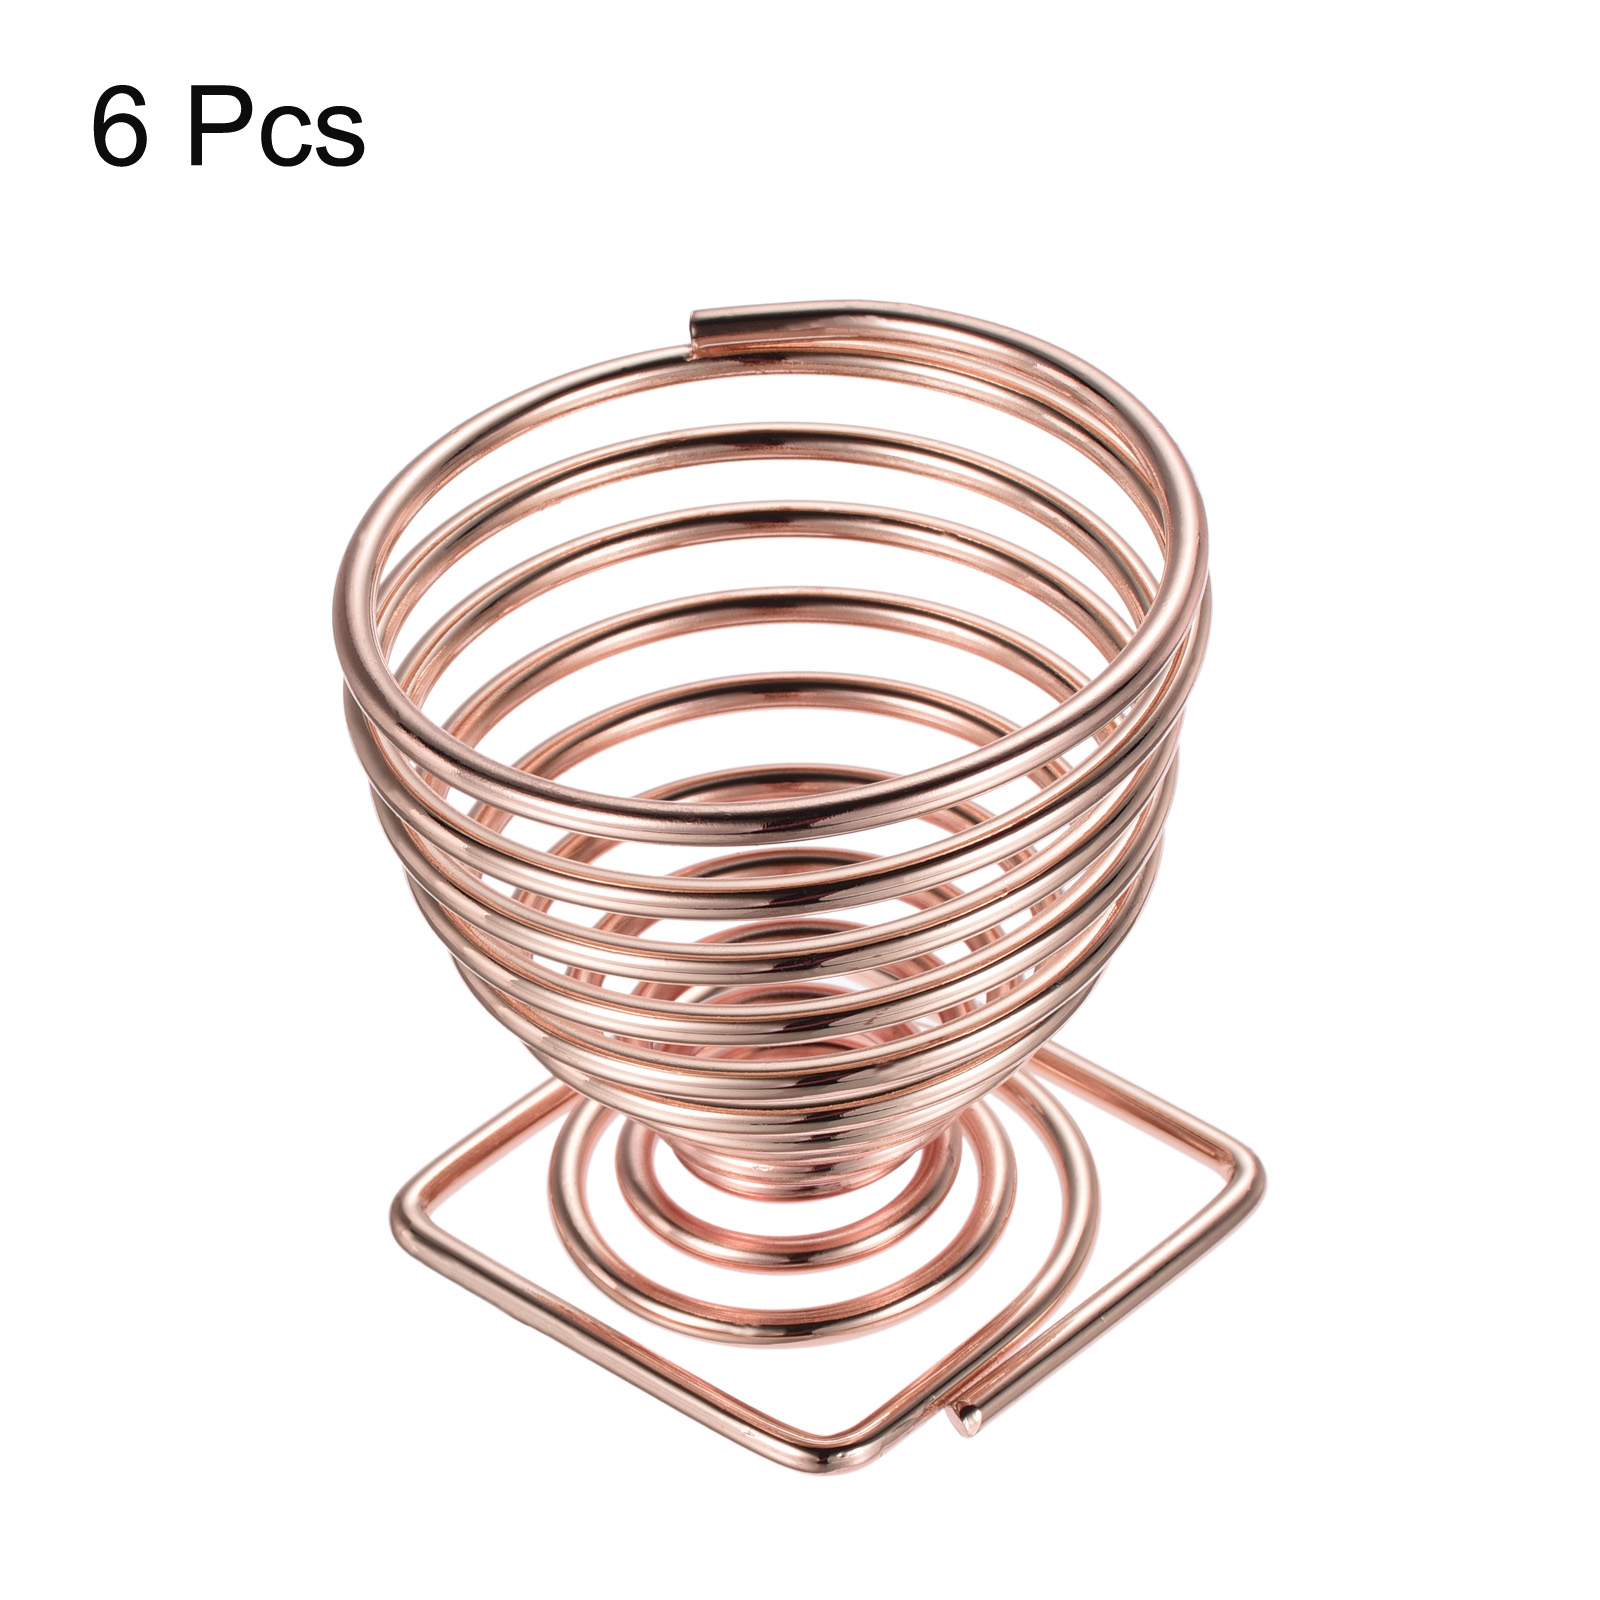 Uxcell 1.7" x 1.7" x 2" Air Plant Holder, 6 Pack Plant Stand Rack Pot Containers for Home Wedding, Rose Gold - image 3 of 6